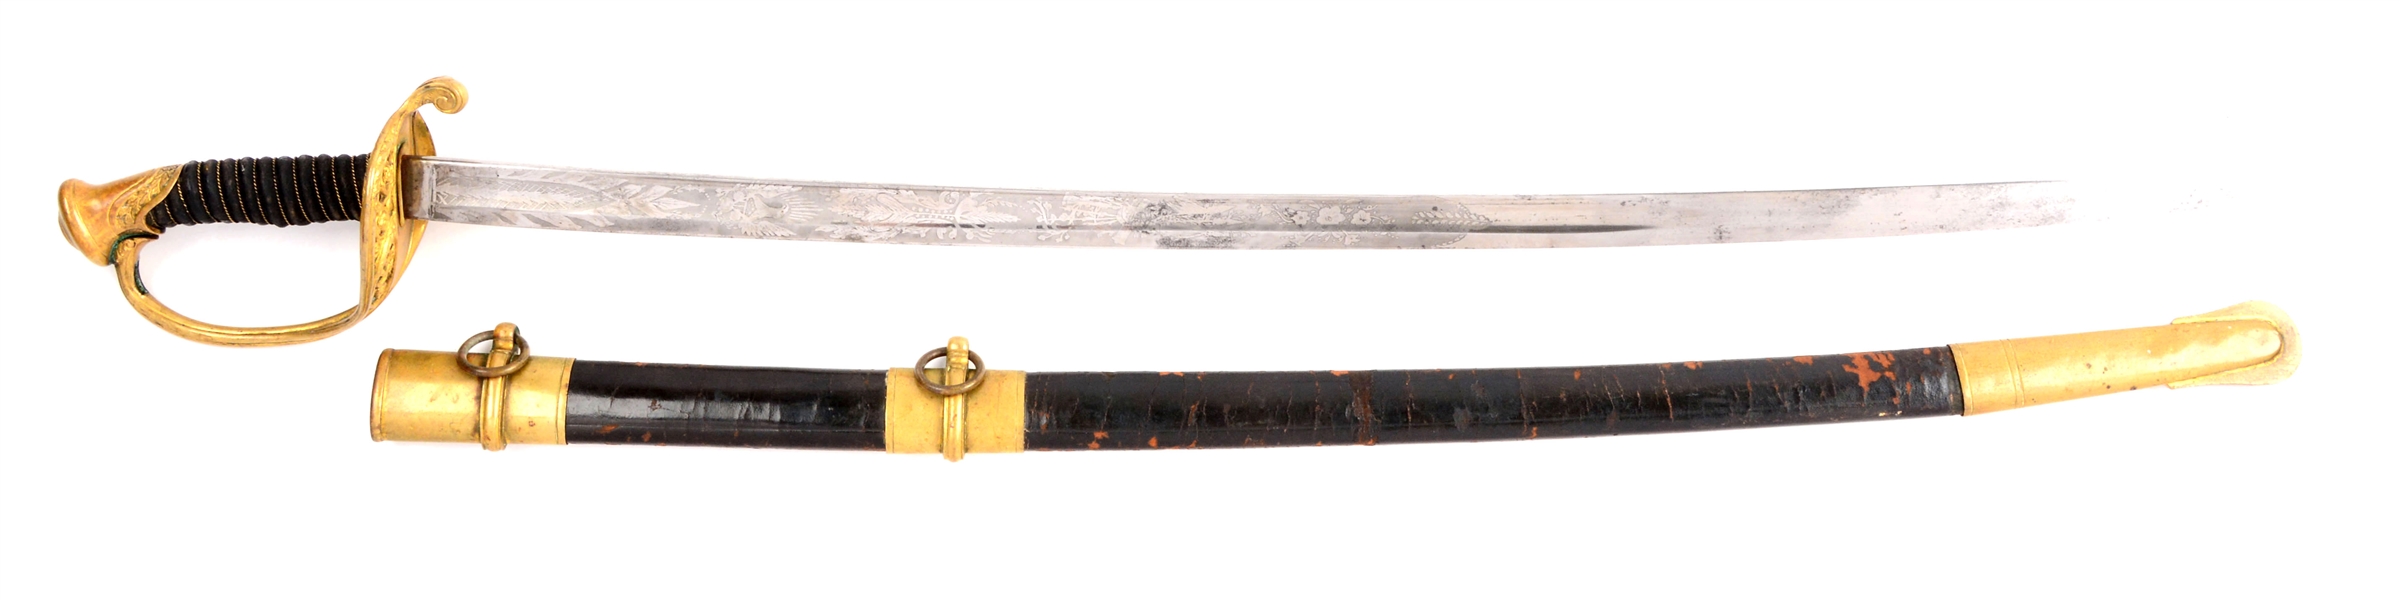 U.S. MODEL 1850 FOOT OFFICERS SWORD BY ROBY.